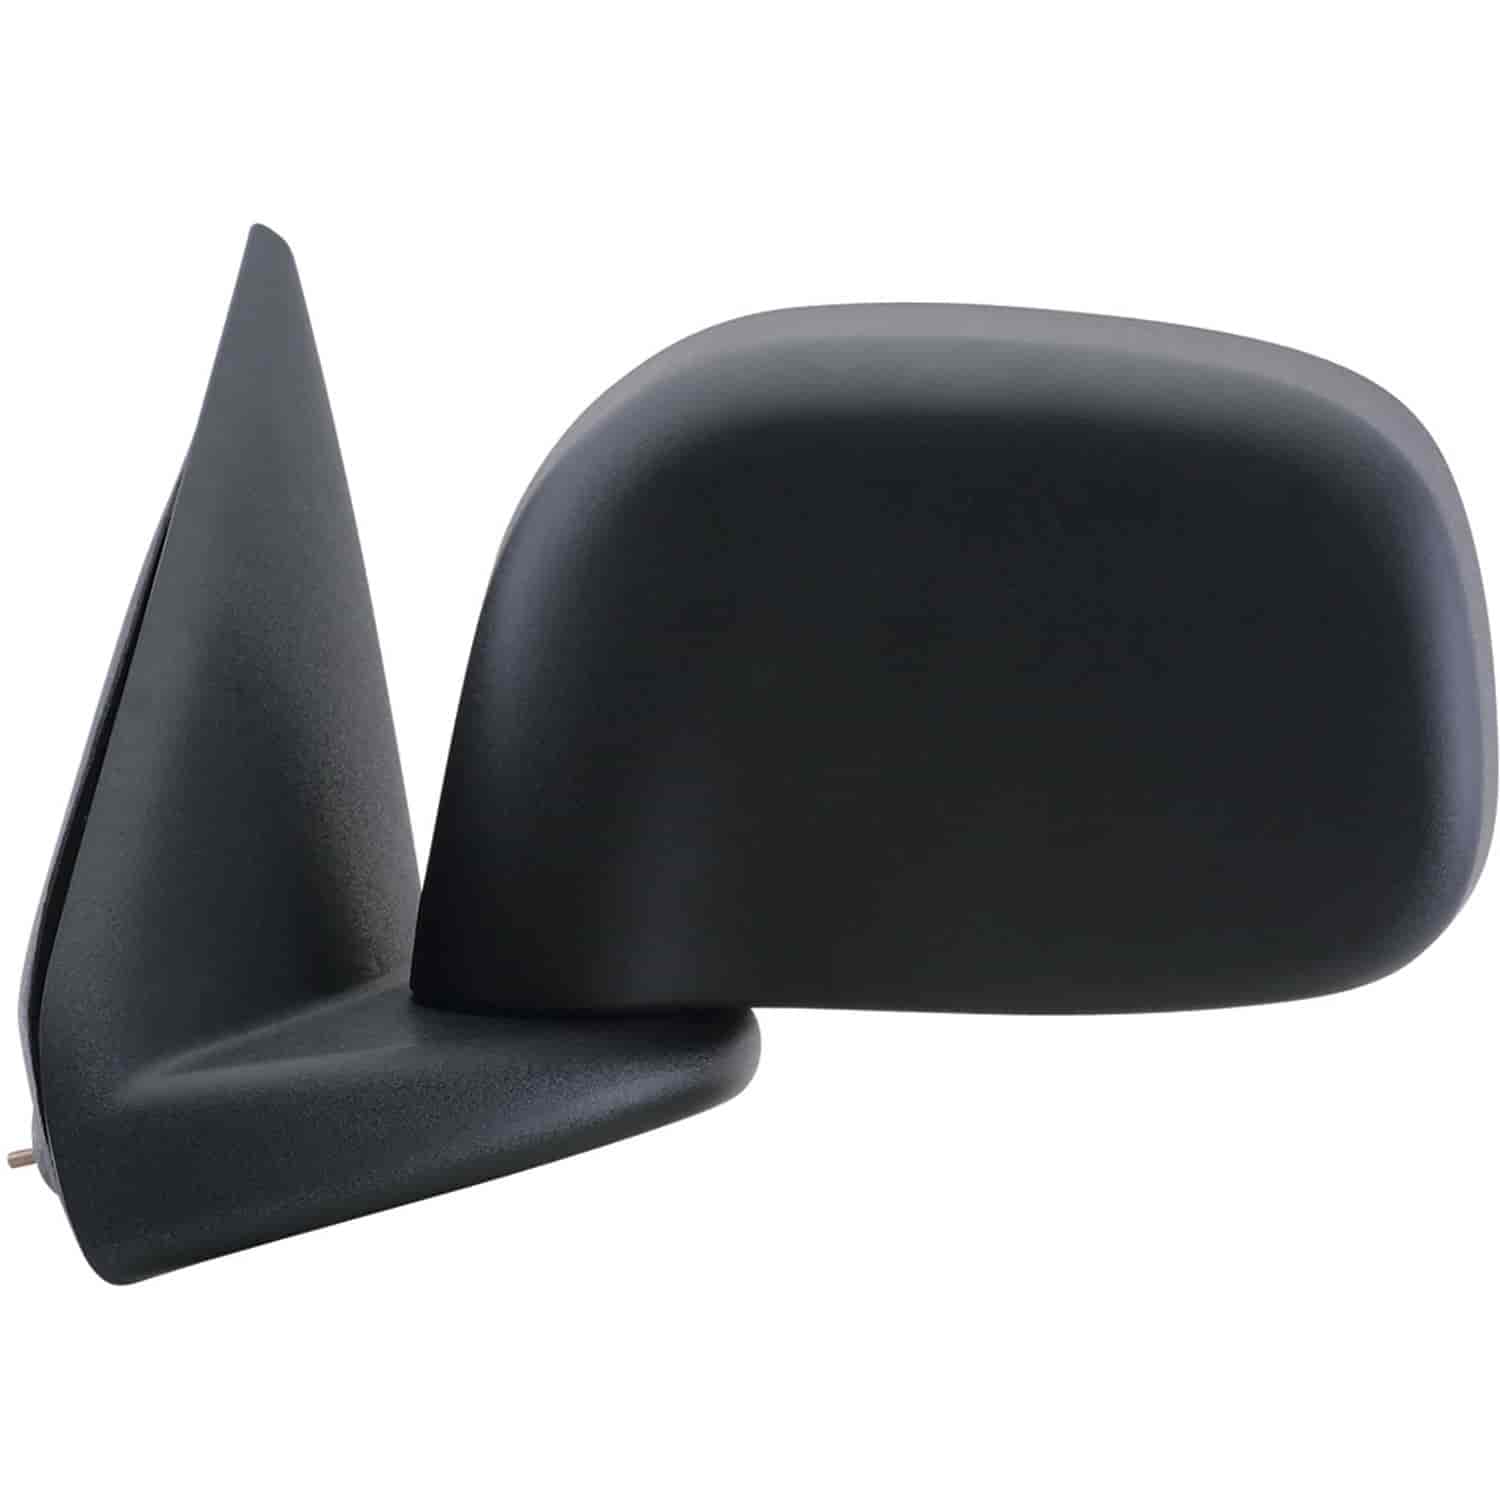 OEM Style Replacement mirror for 02-08 Dodge Ram Pick-Up 1500 03-09 25003500 w/o towing pkg driver s